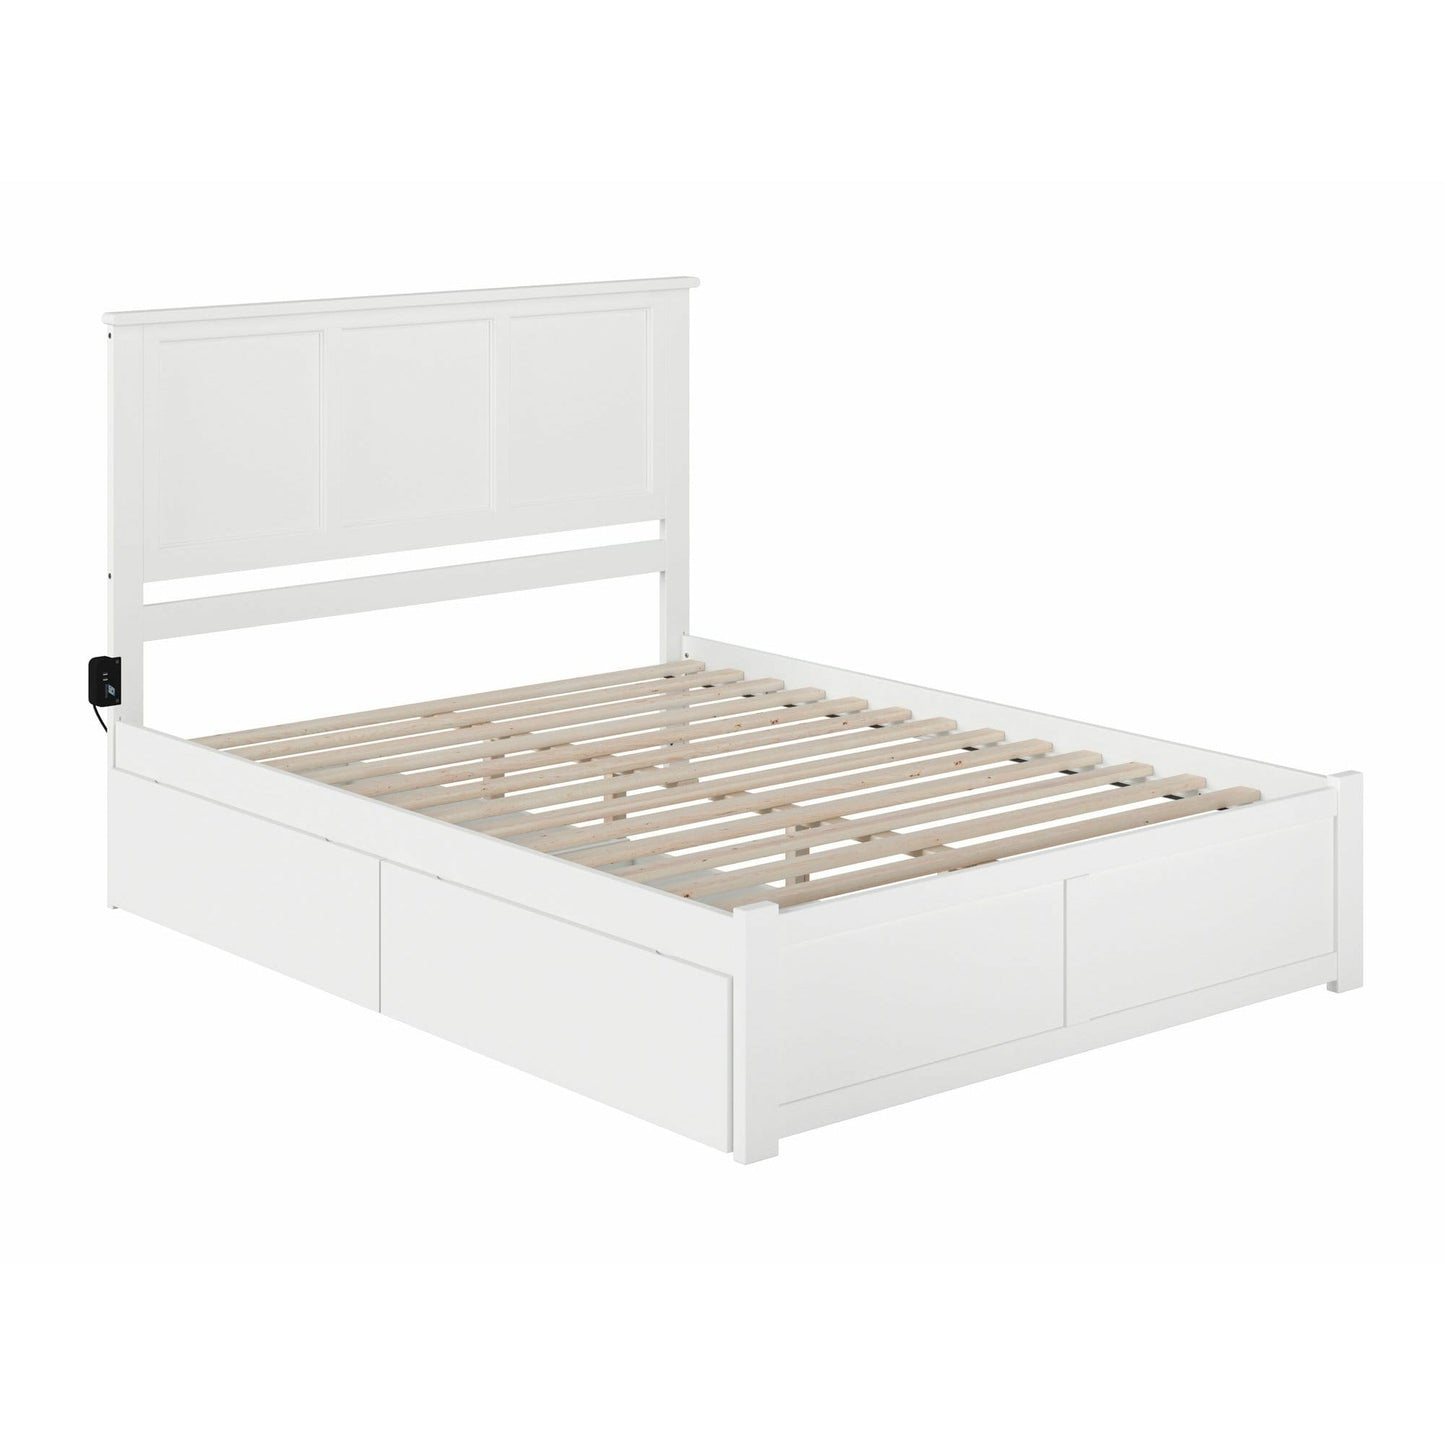 Atlantic Furniture Bed Madison King Platform Bed with Flat Panel Foot Board and 2 Urban Bed Drawers in Espresso